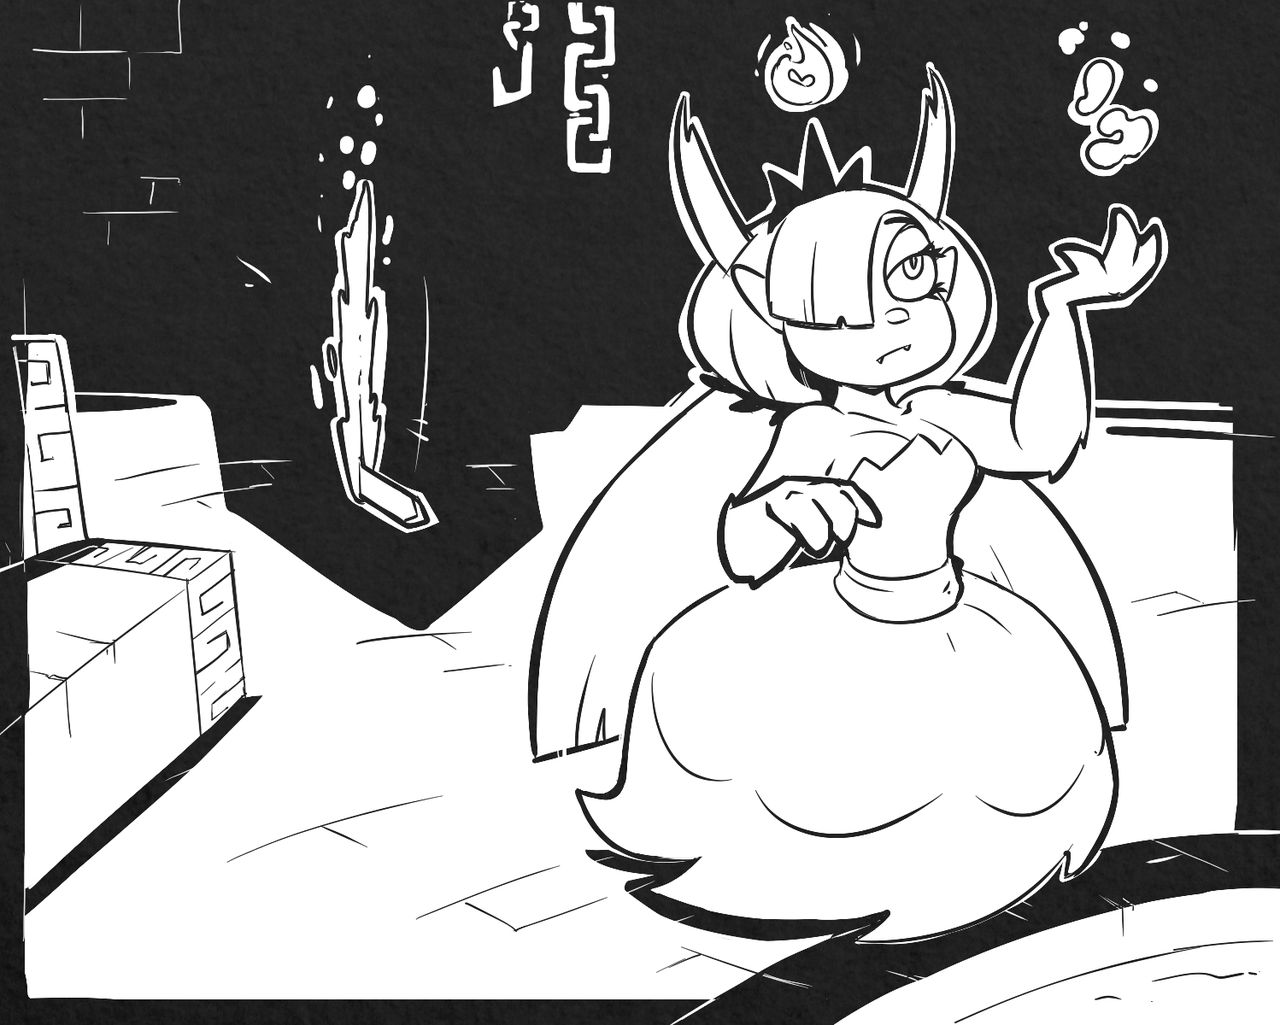 Hekapoo – Star Vs The Forces of Evil - 2